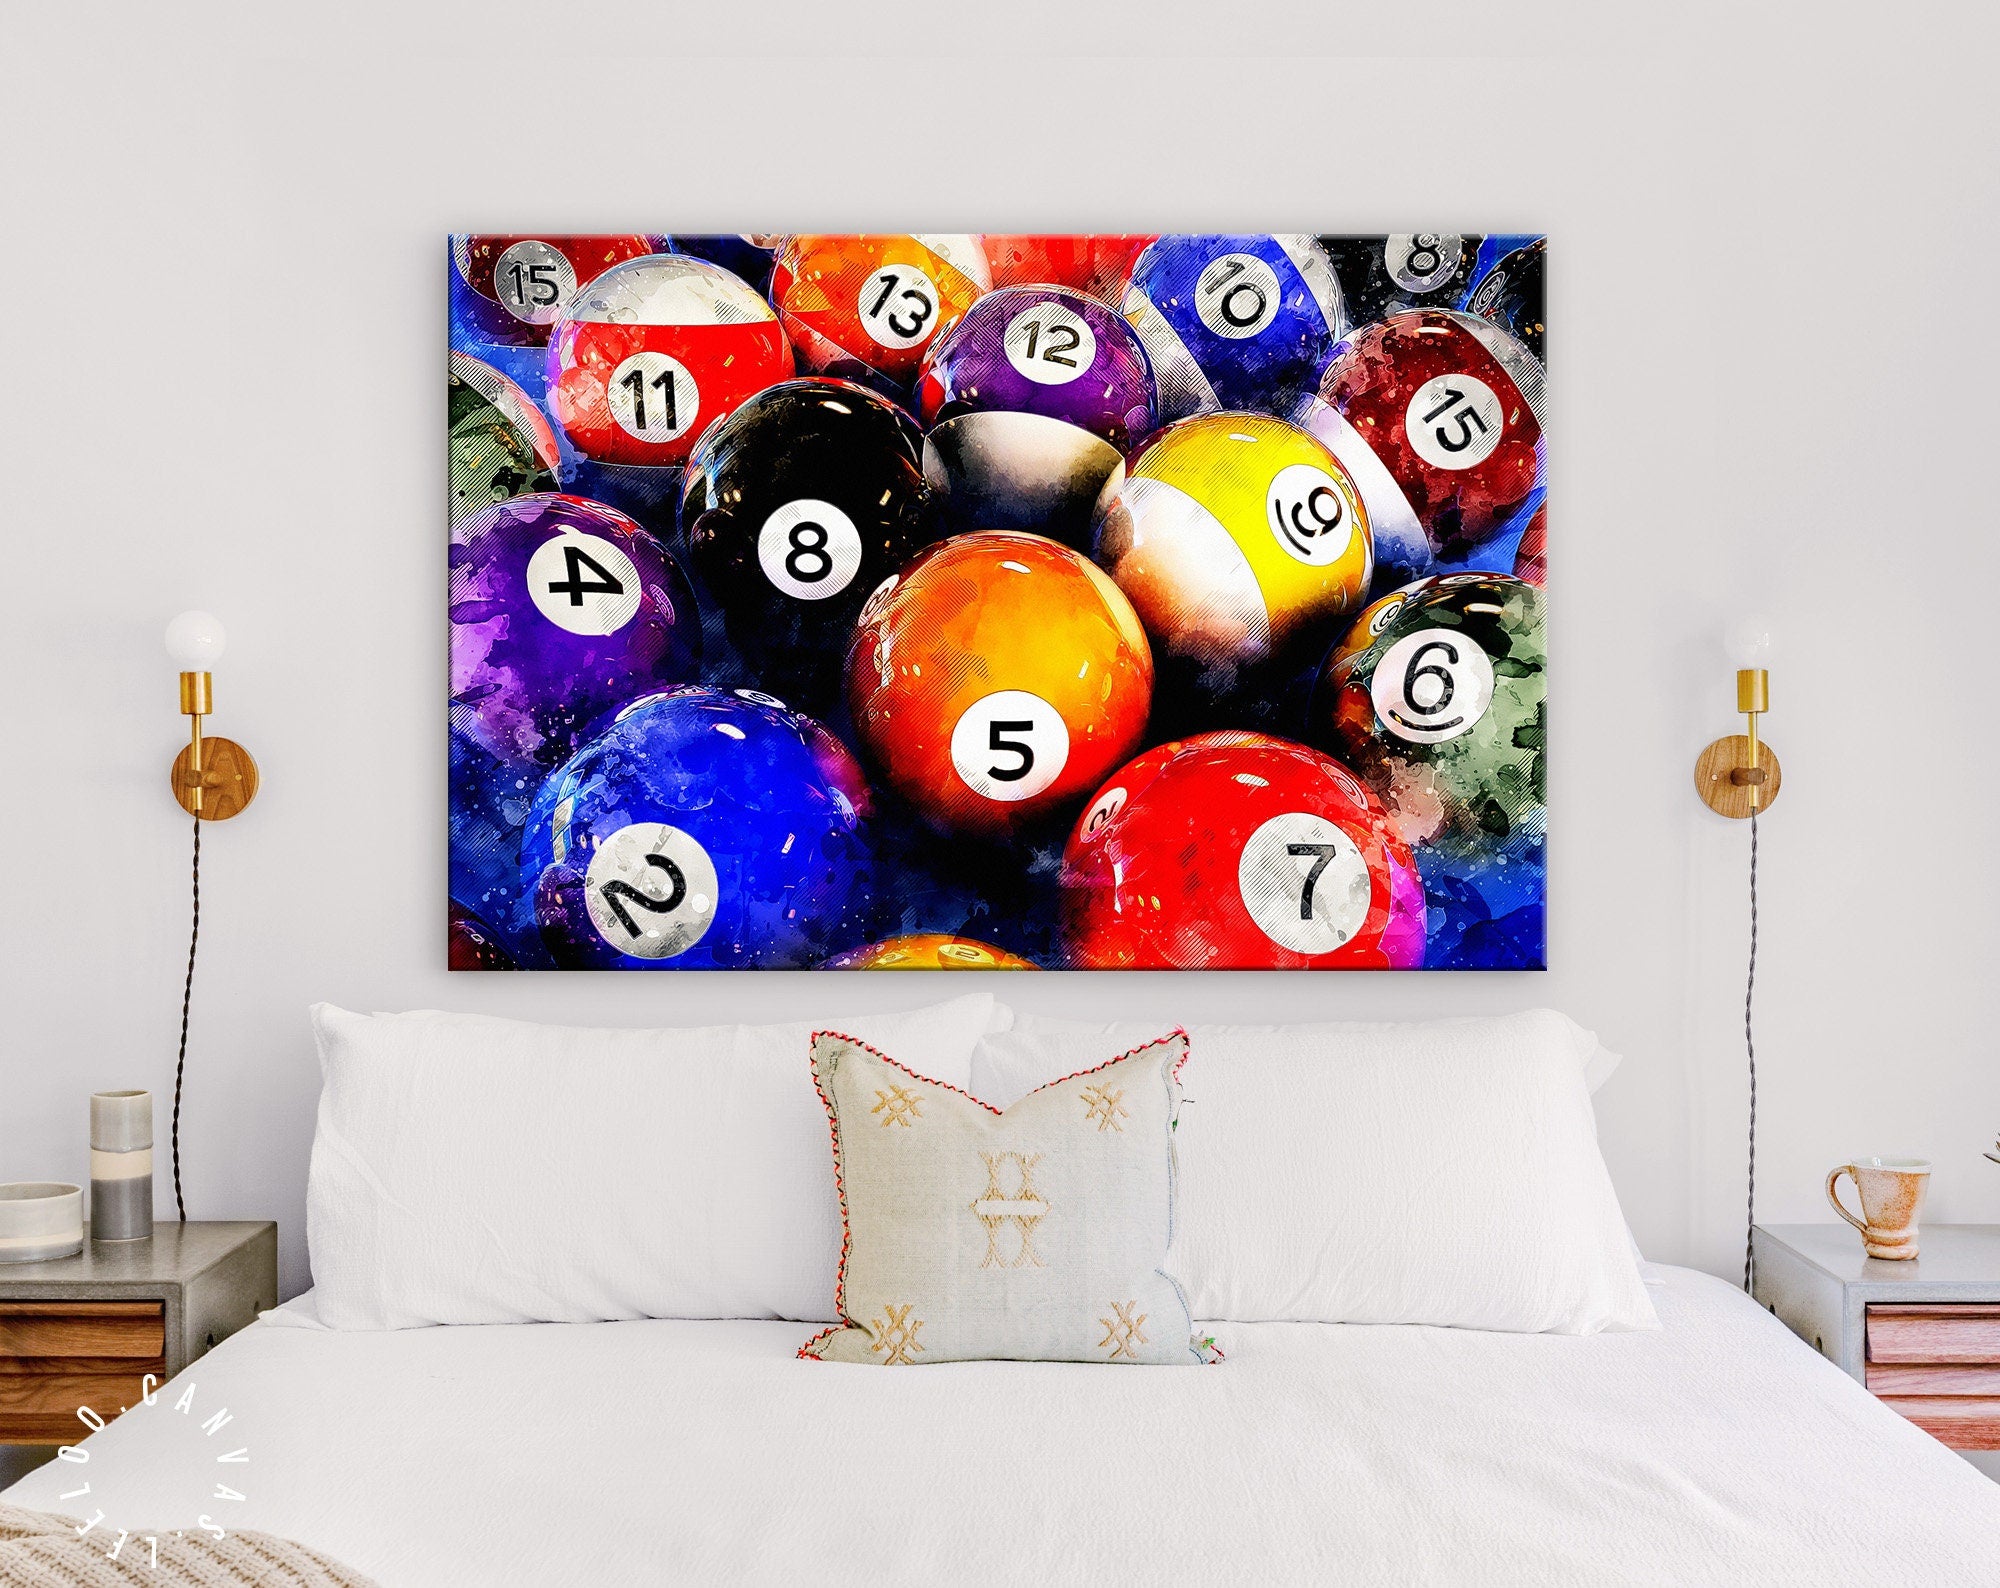 Poolrooms Art Board Prints for Sale